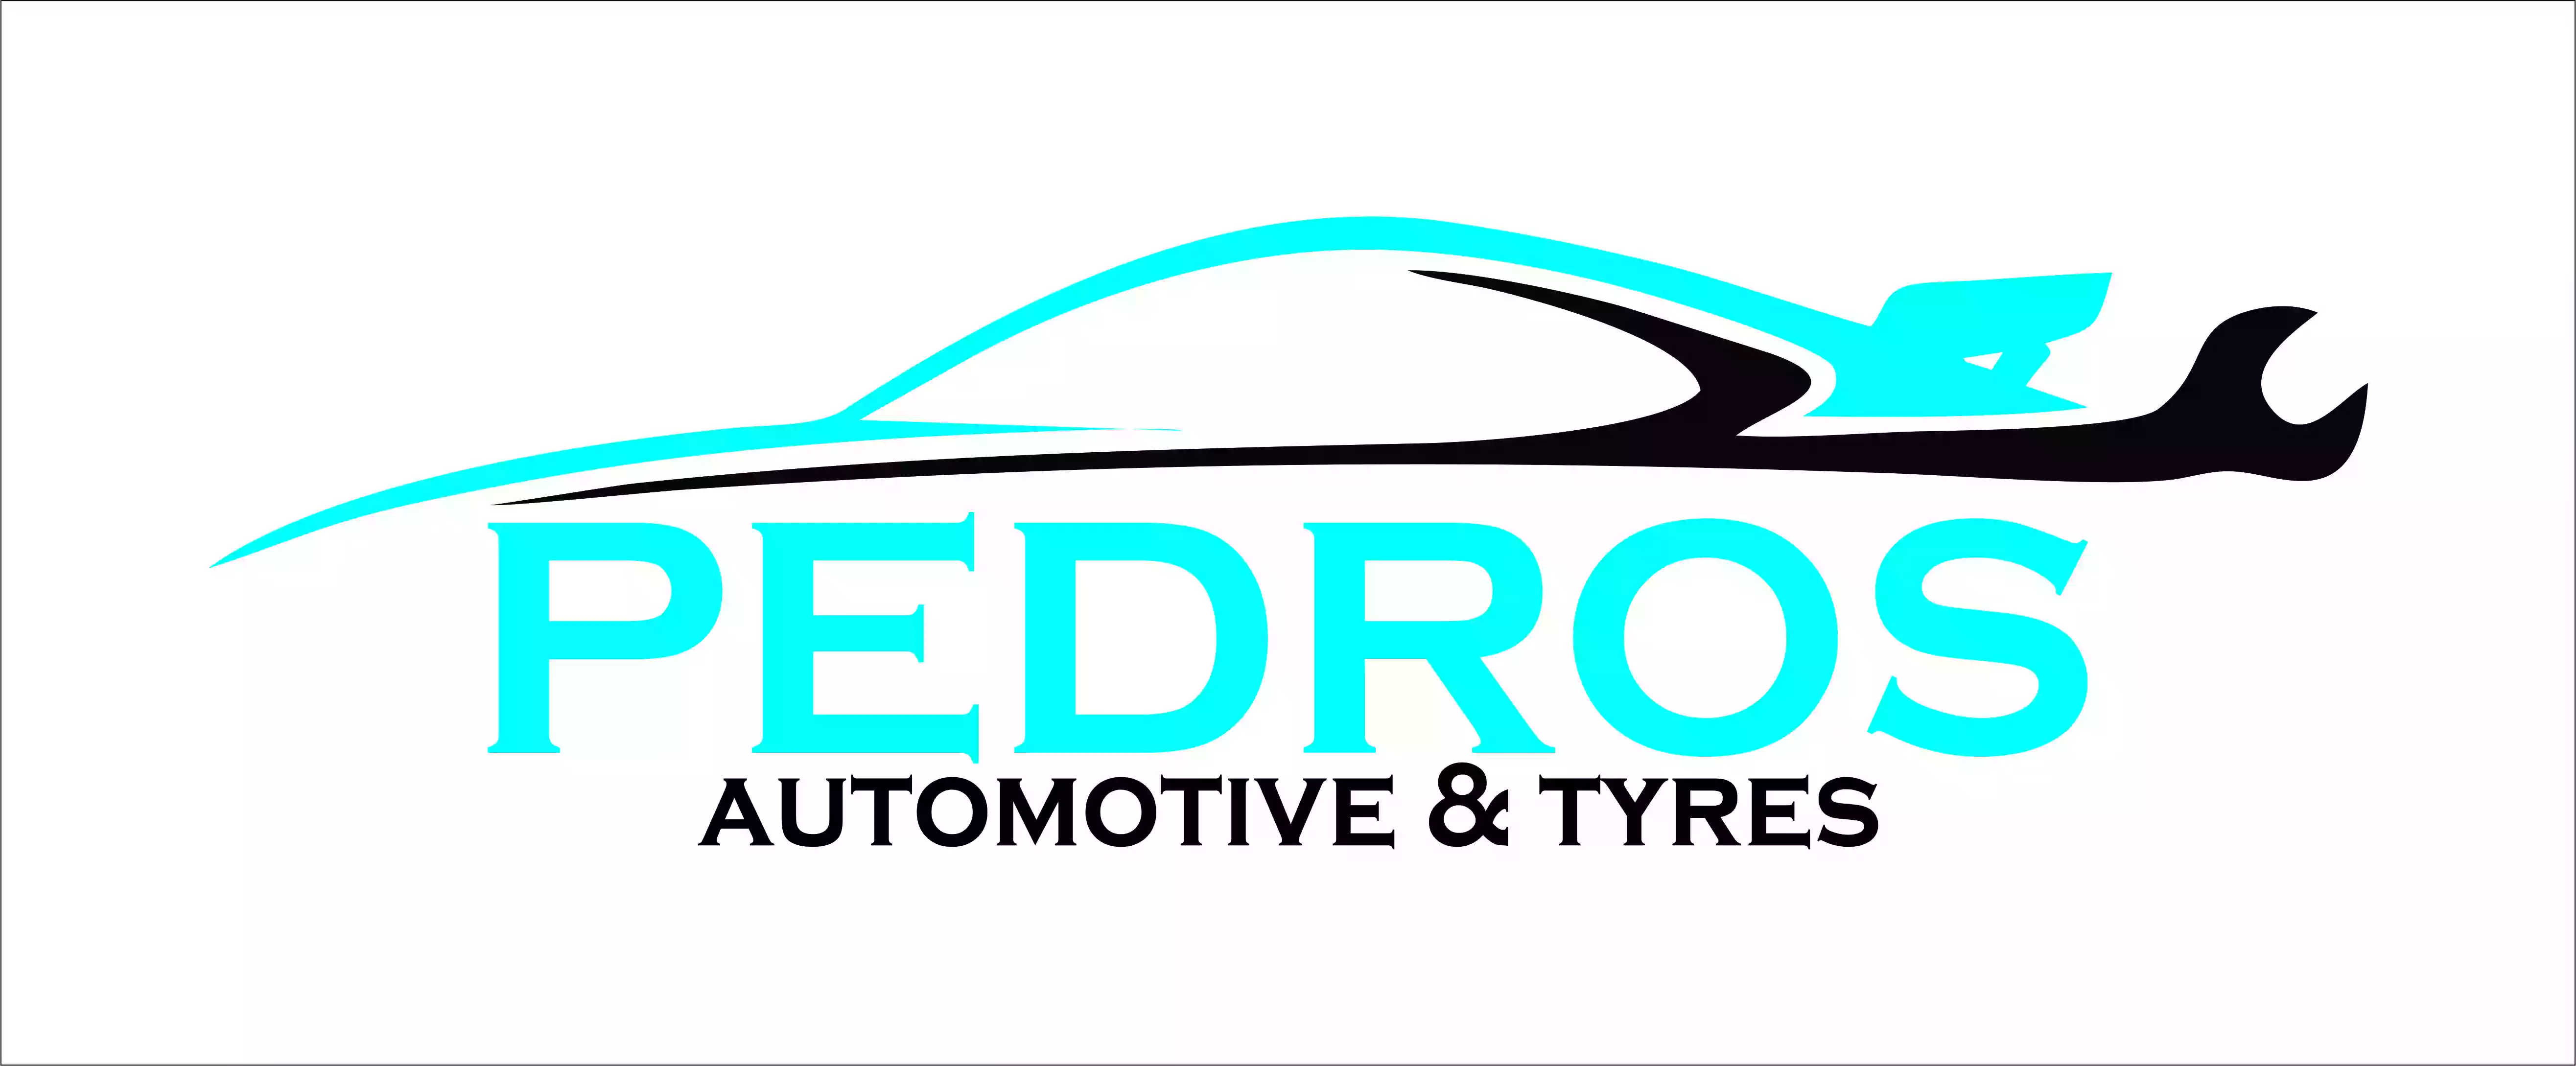 Pedro's Automotive And Tyres